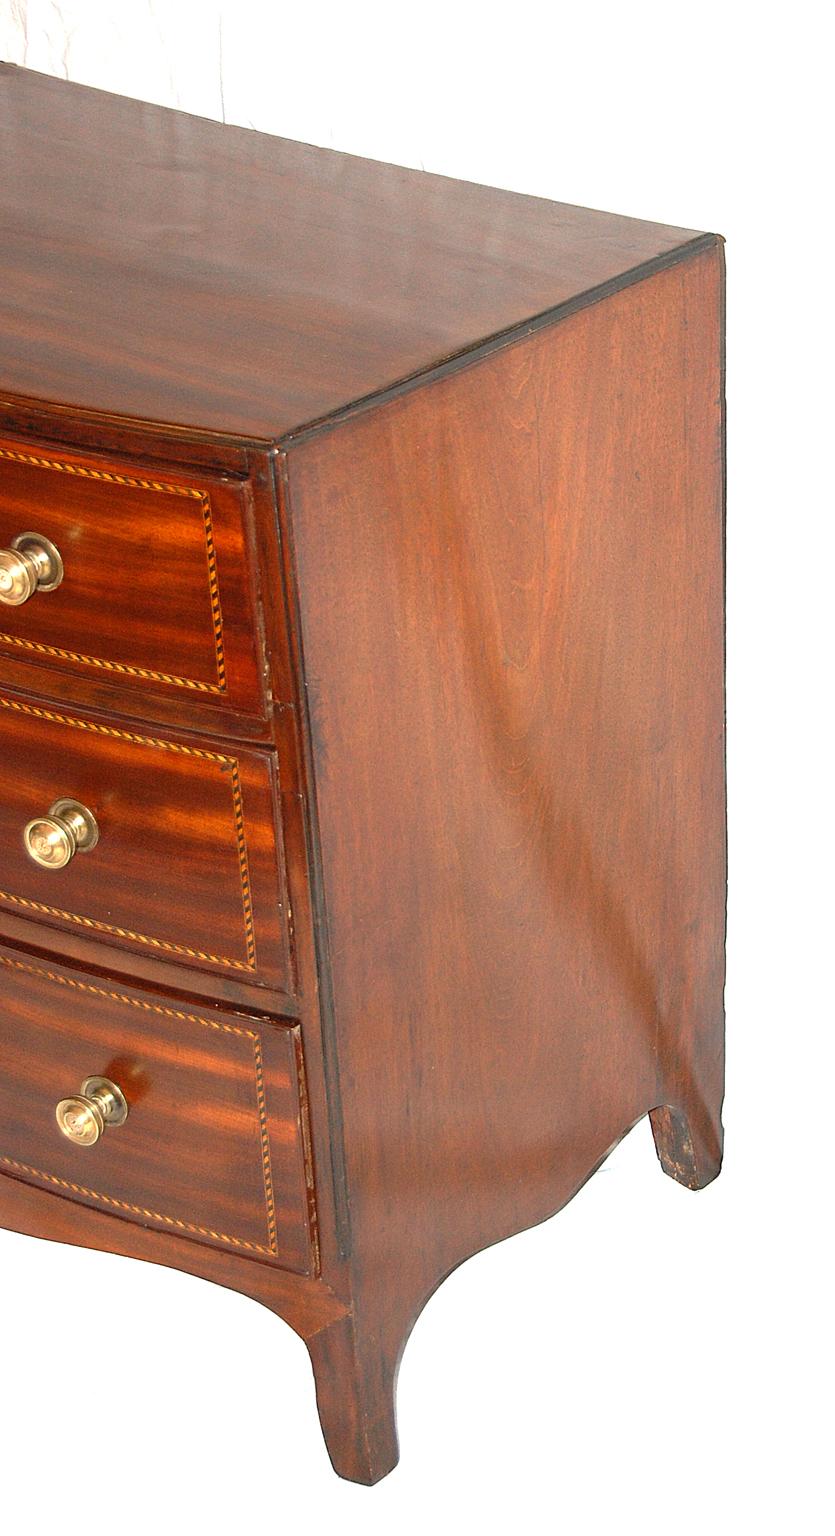 Mahogany English Georgian Period Small Hepplewhite Bowfront Chest of Drawers with Inlay